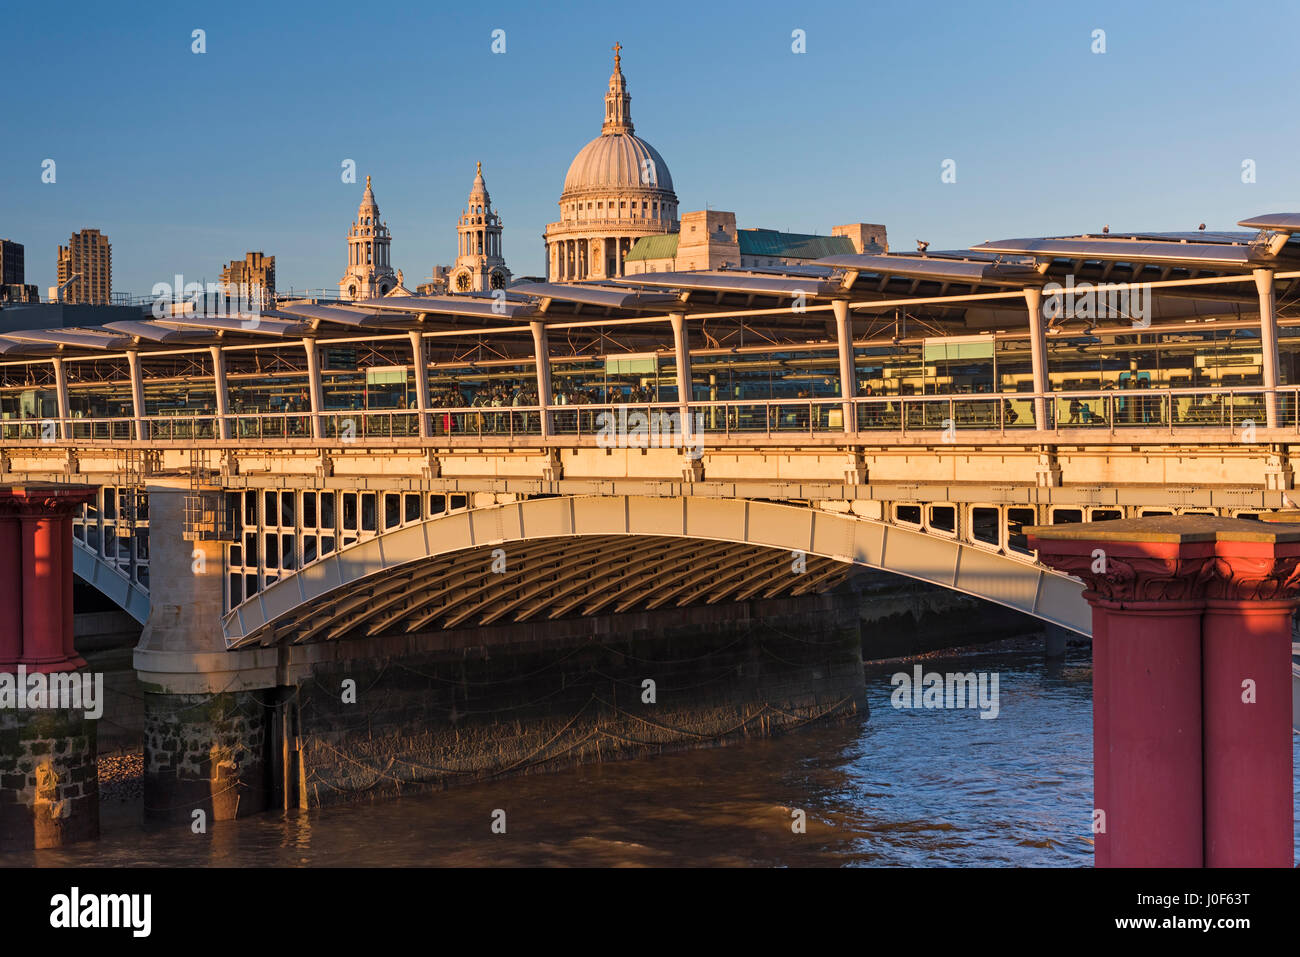 Blackfriars Bridge railway station and St Paul's Cathedral dome  London UK Stock Photo